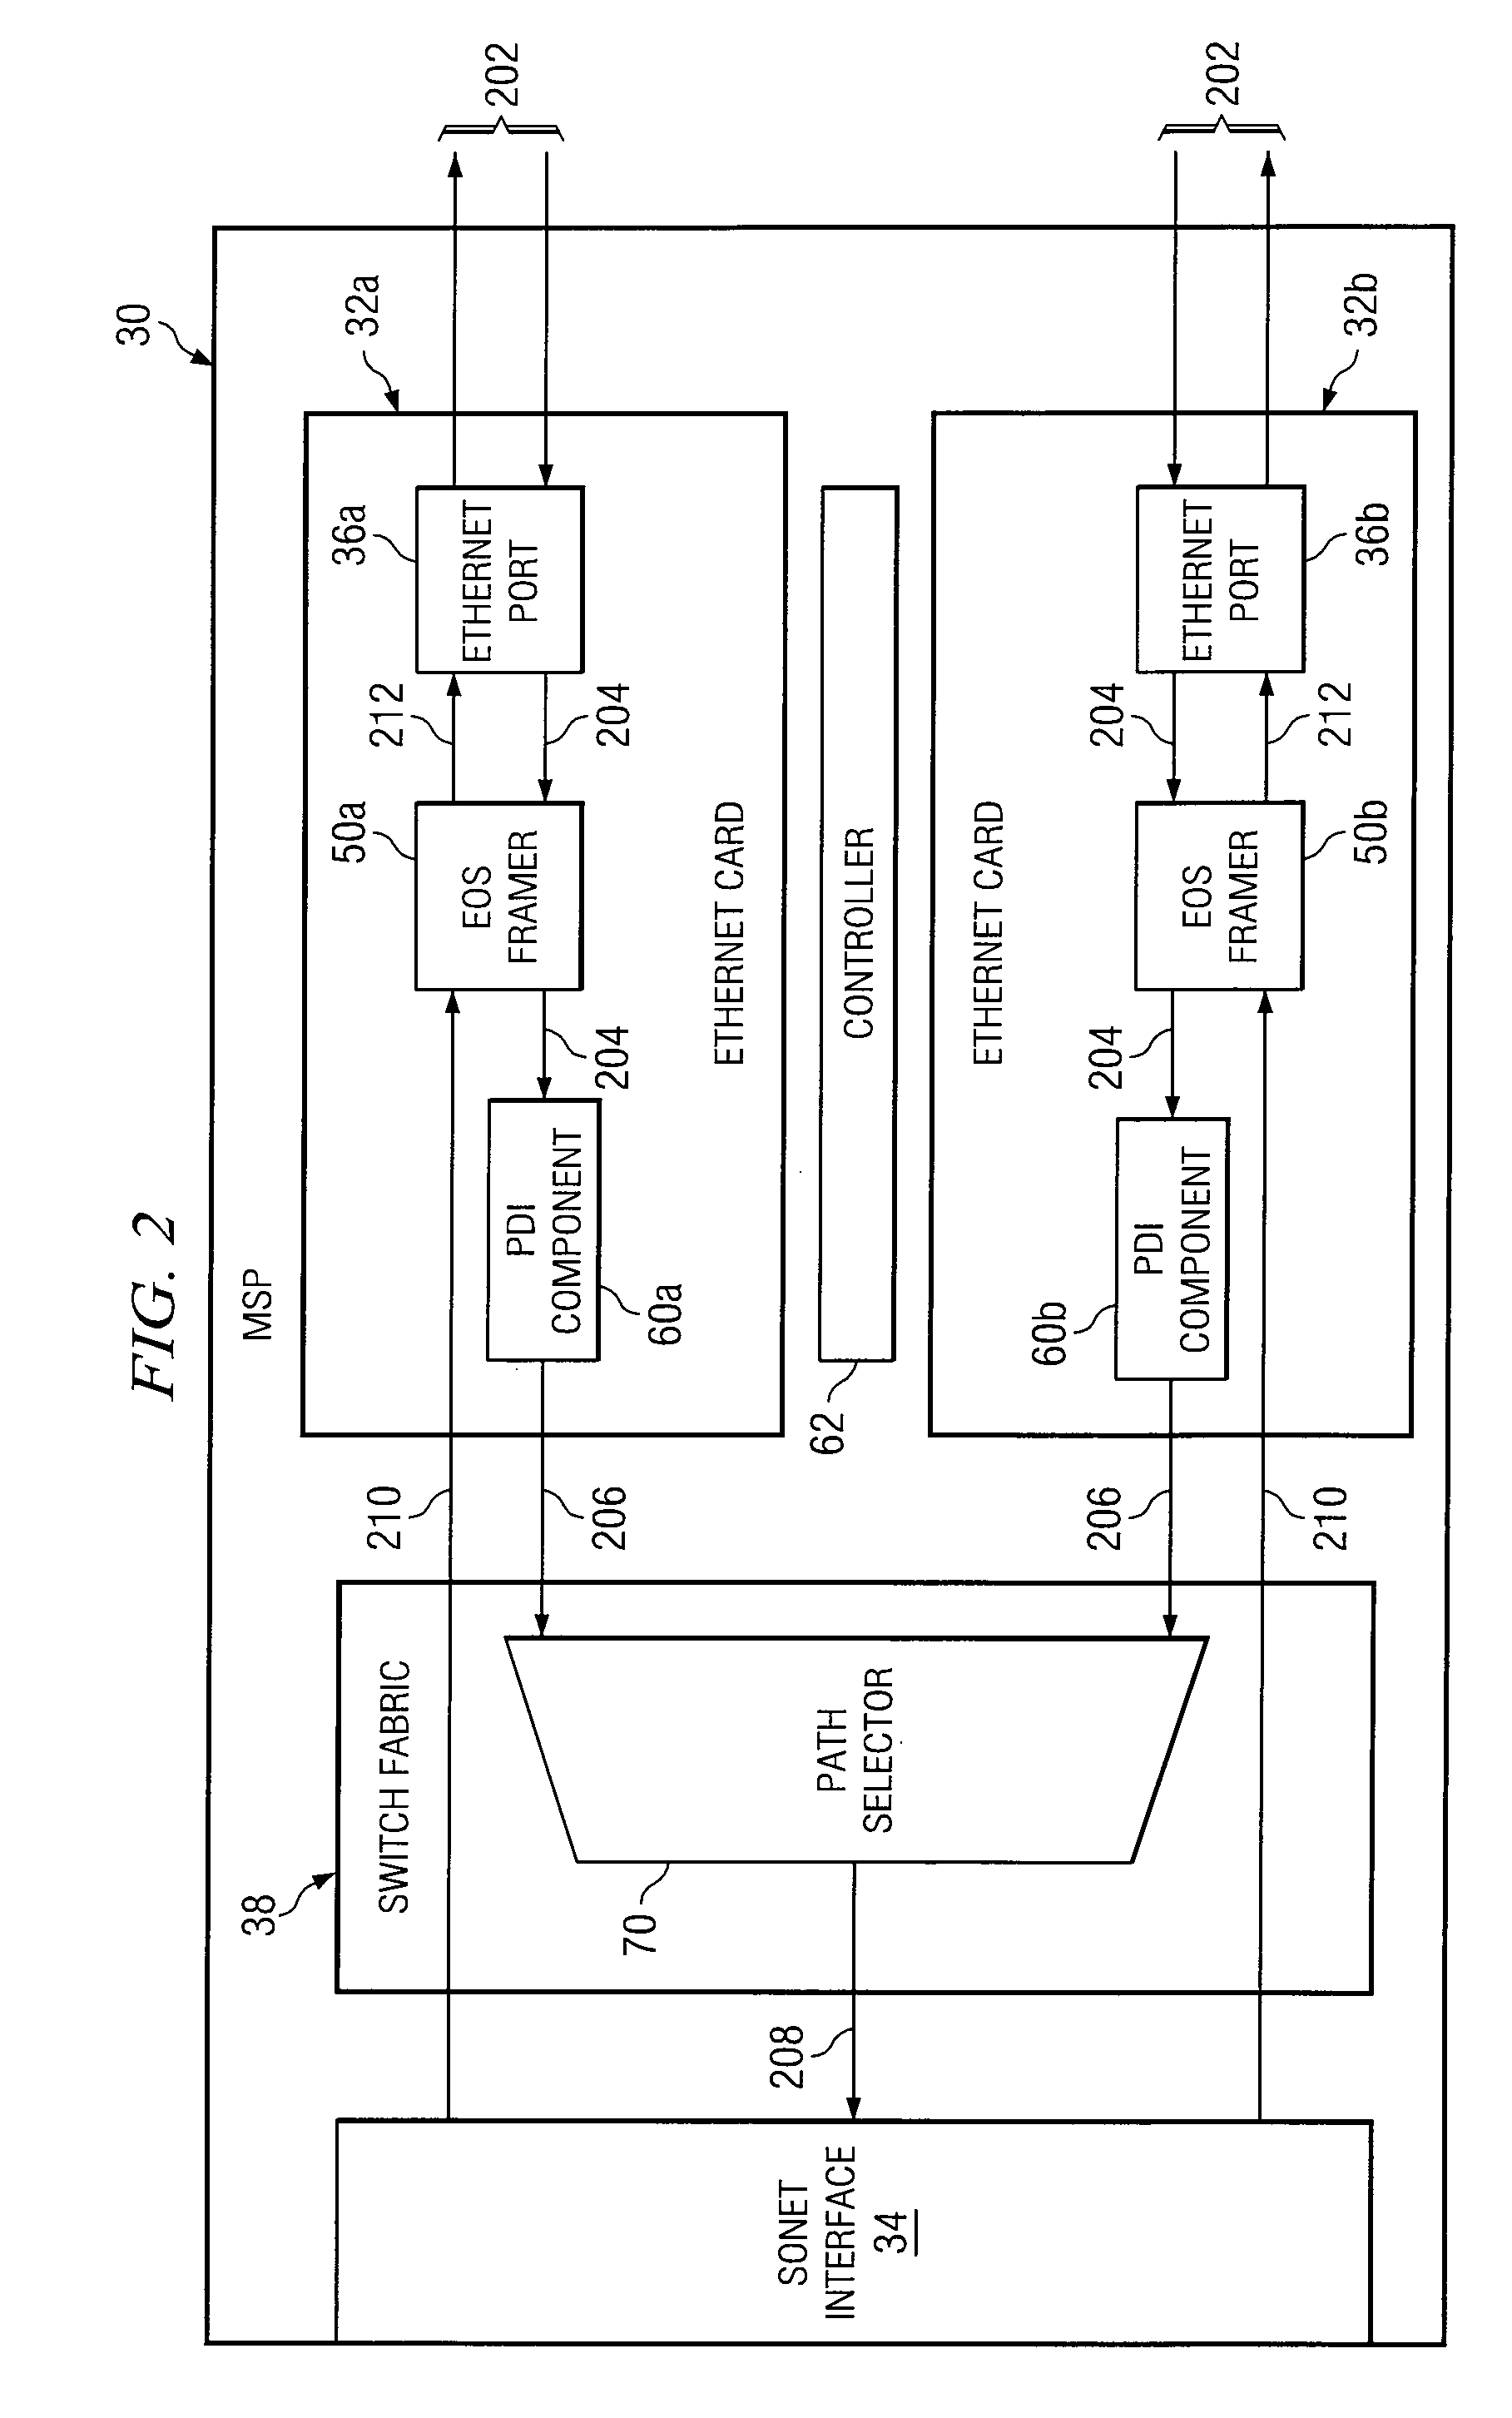 Method and System for Providing Ethernet Protection